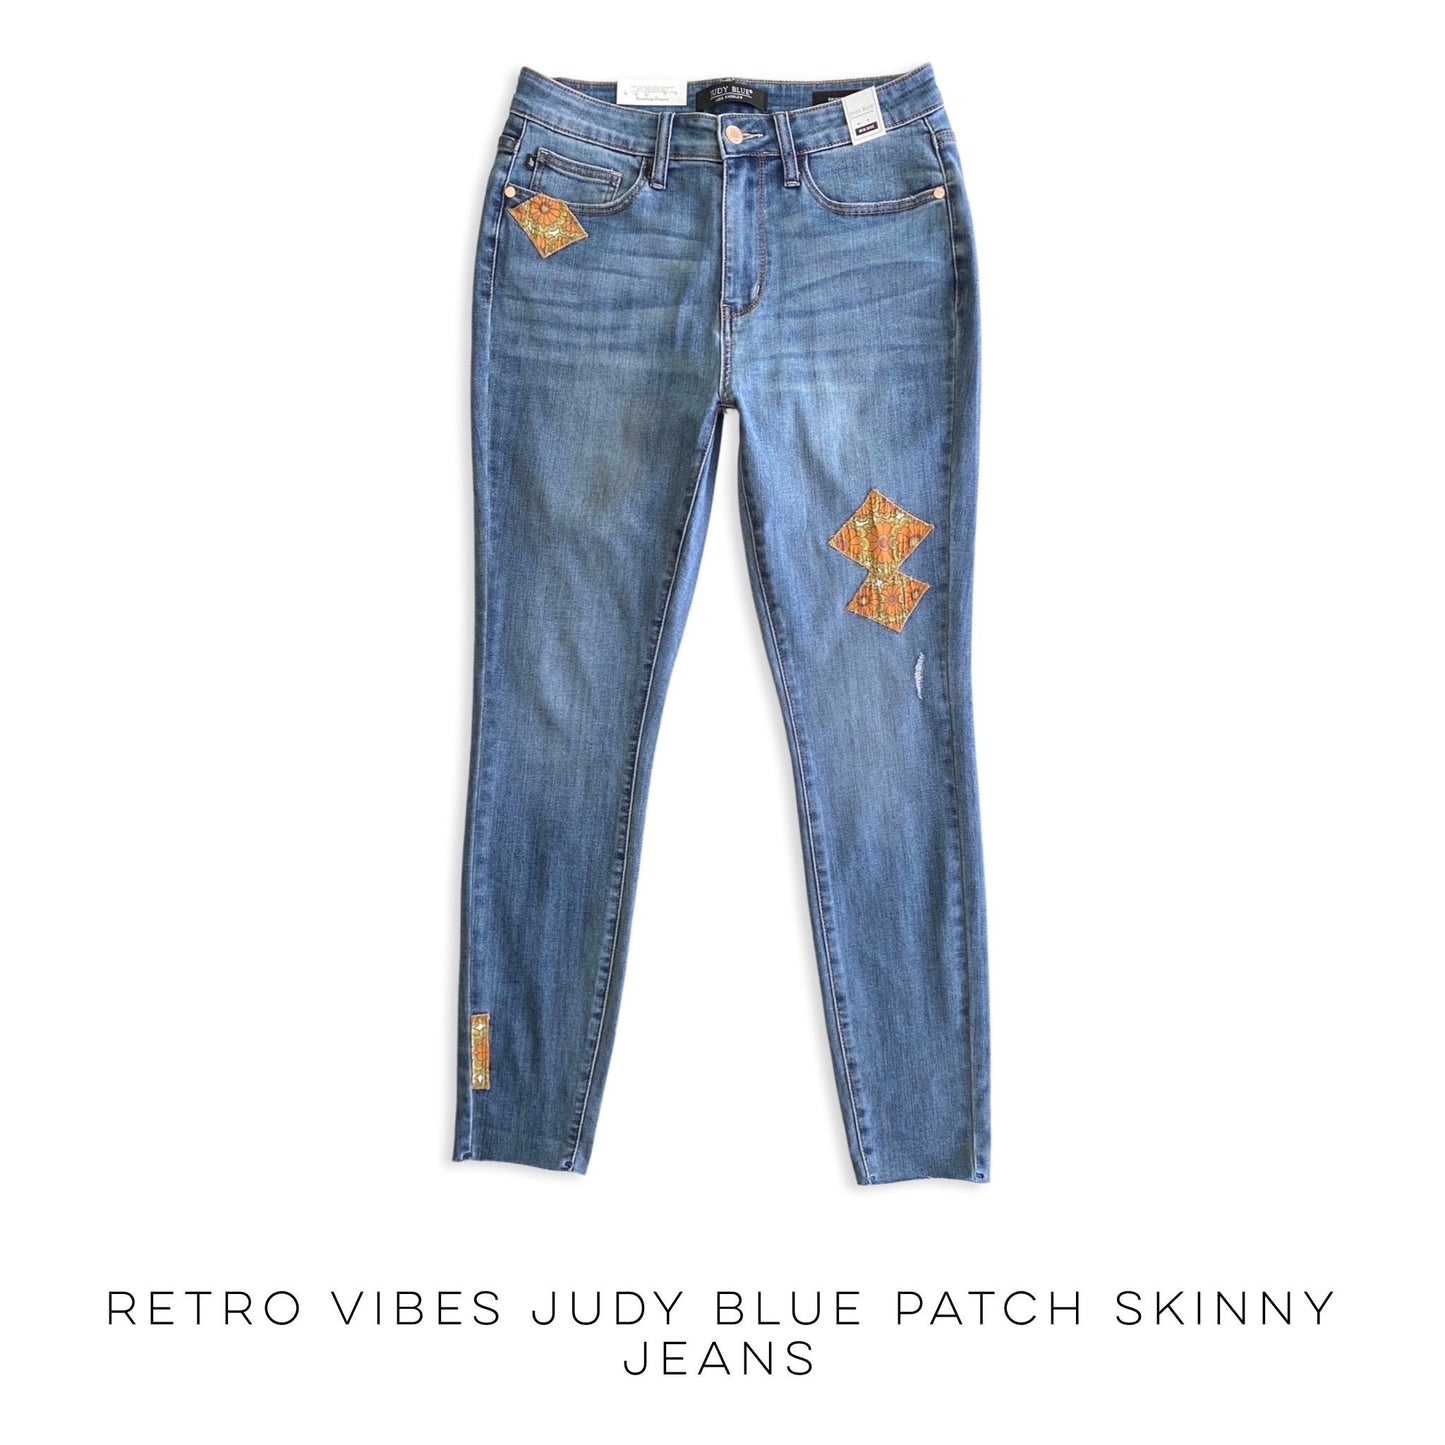 Retro Vibes Judy Blue Patch Skinny Jeans